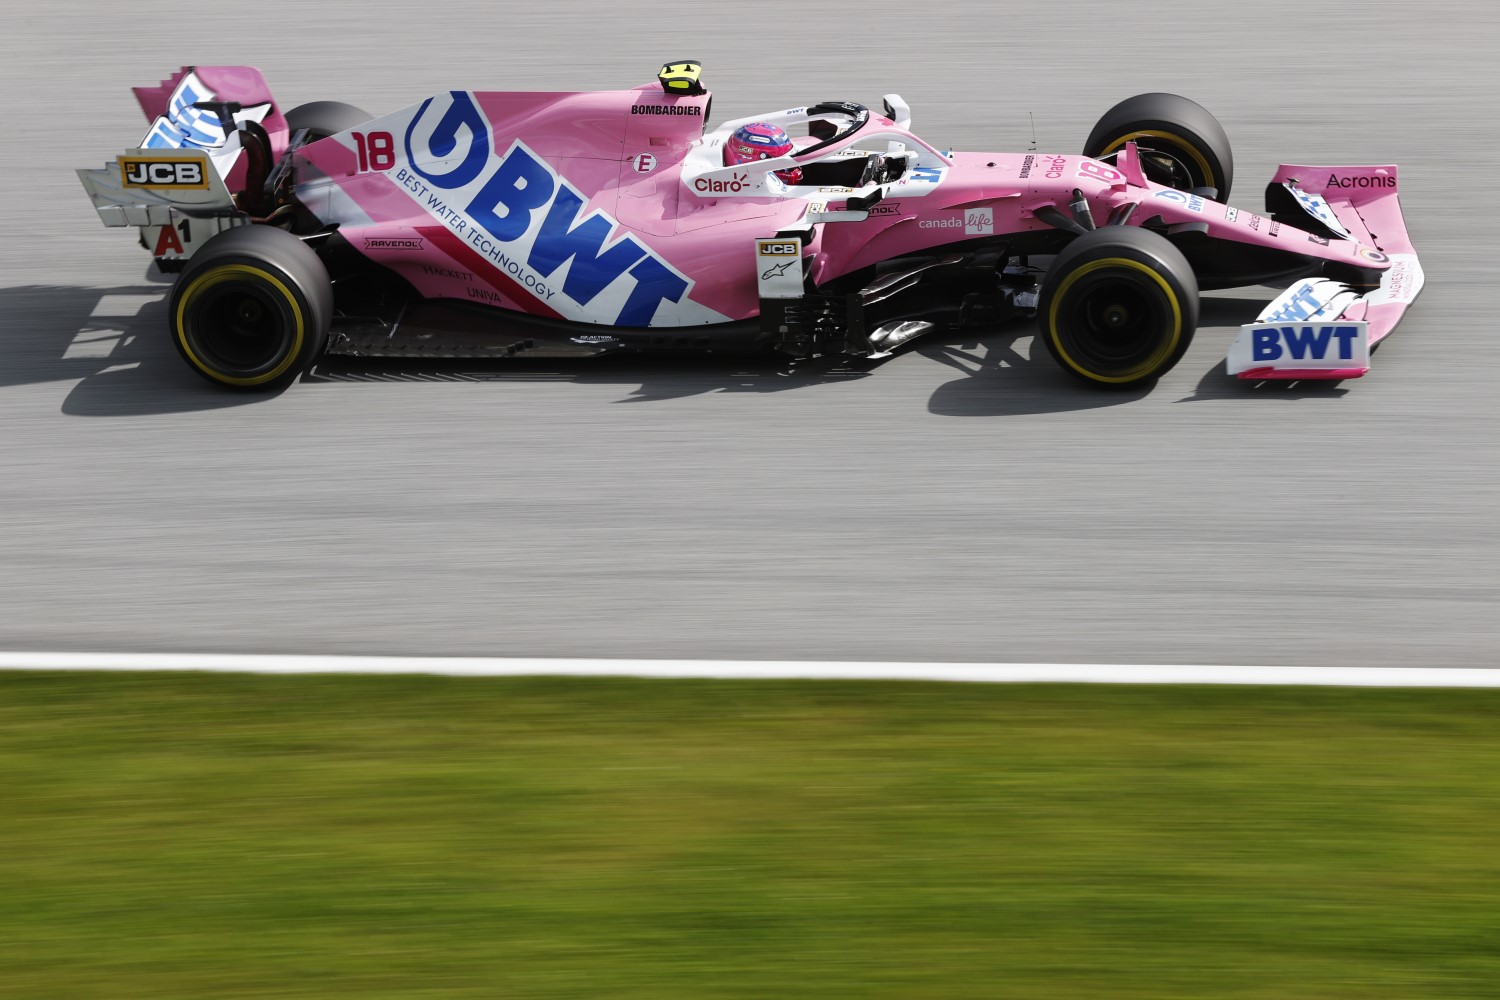 Racing Point is running last year's Mercedes painted pink. They claim it's not but all of a sudden they are 2nd quick behind the works Mercedes team